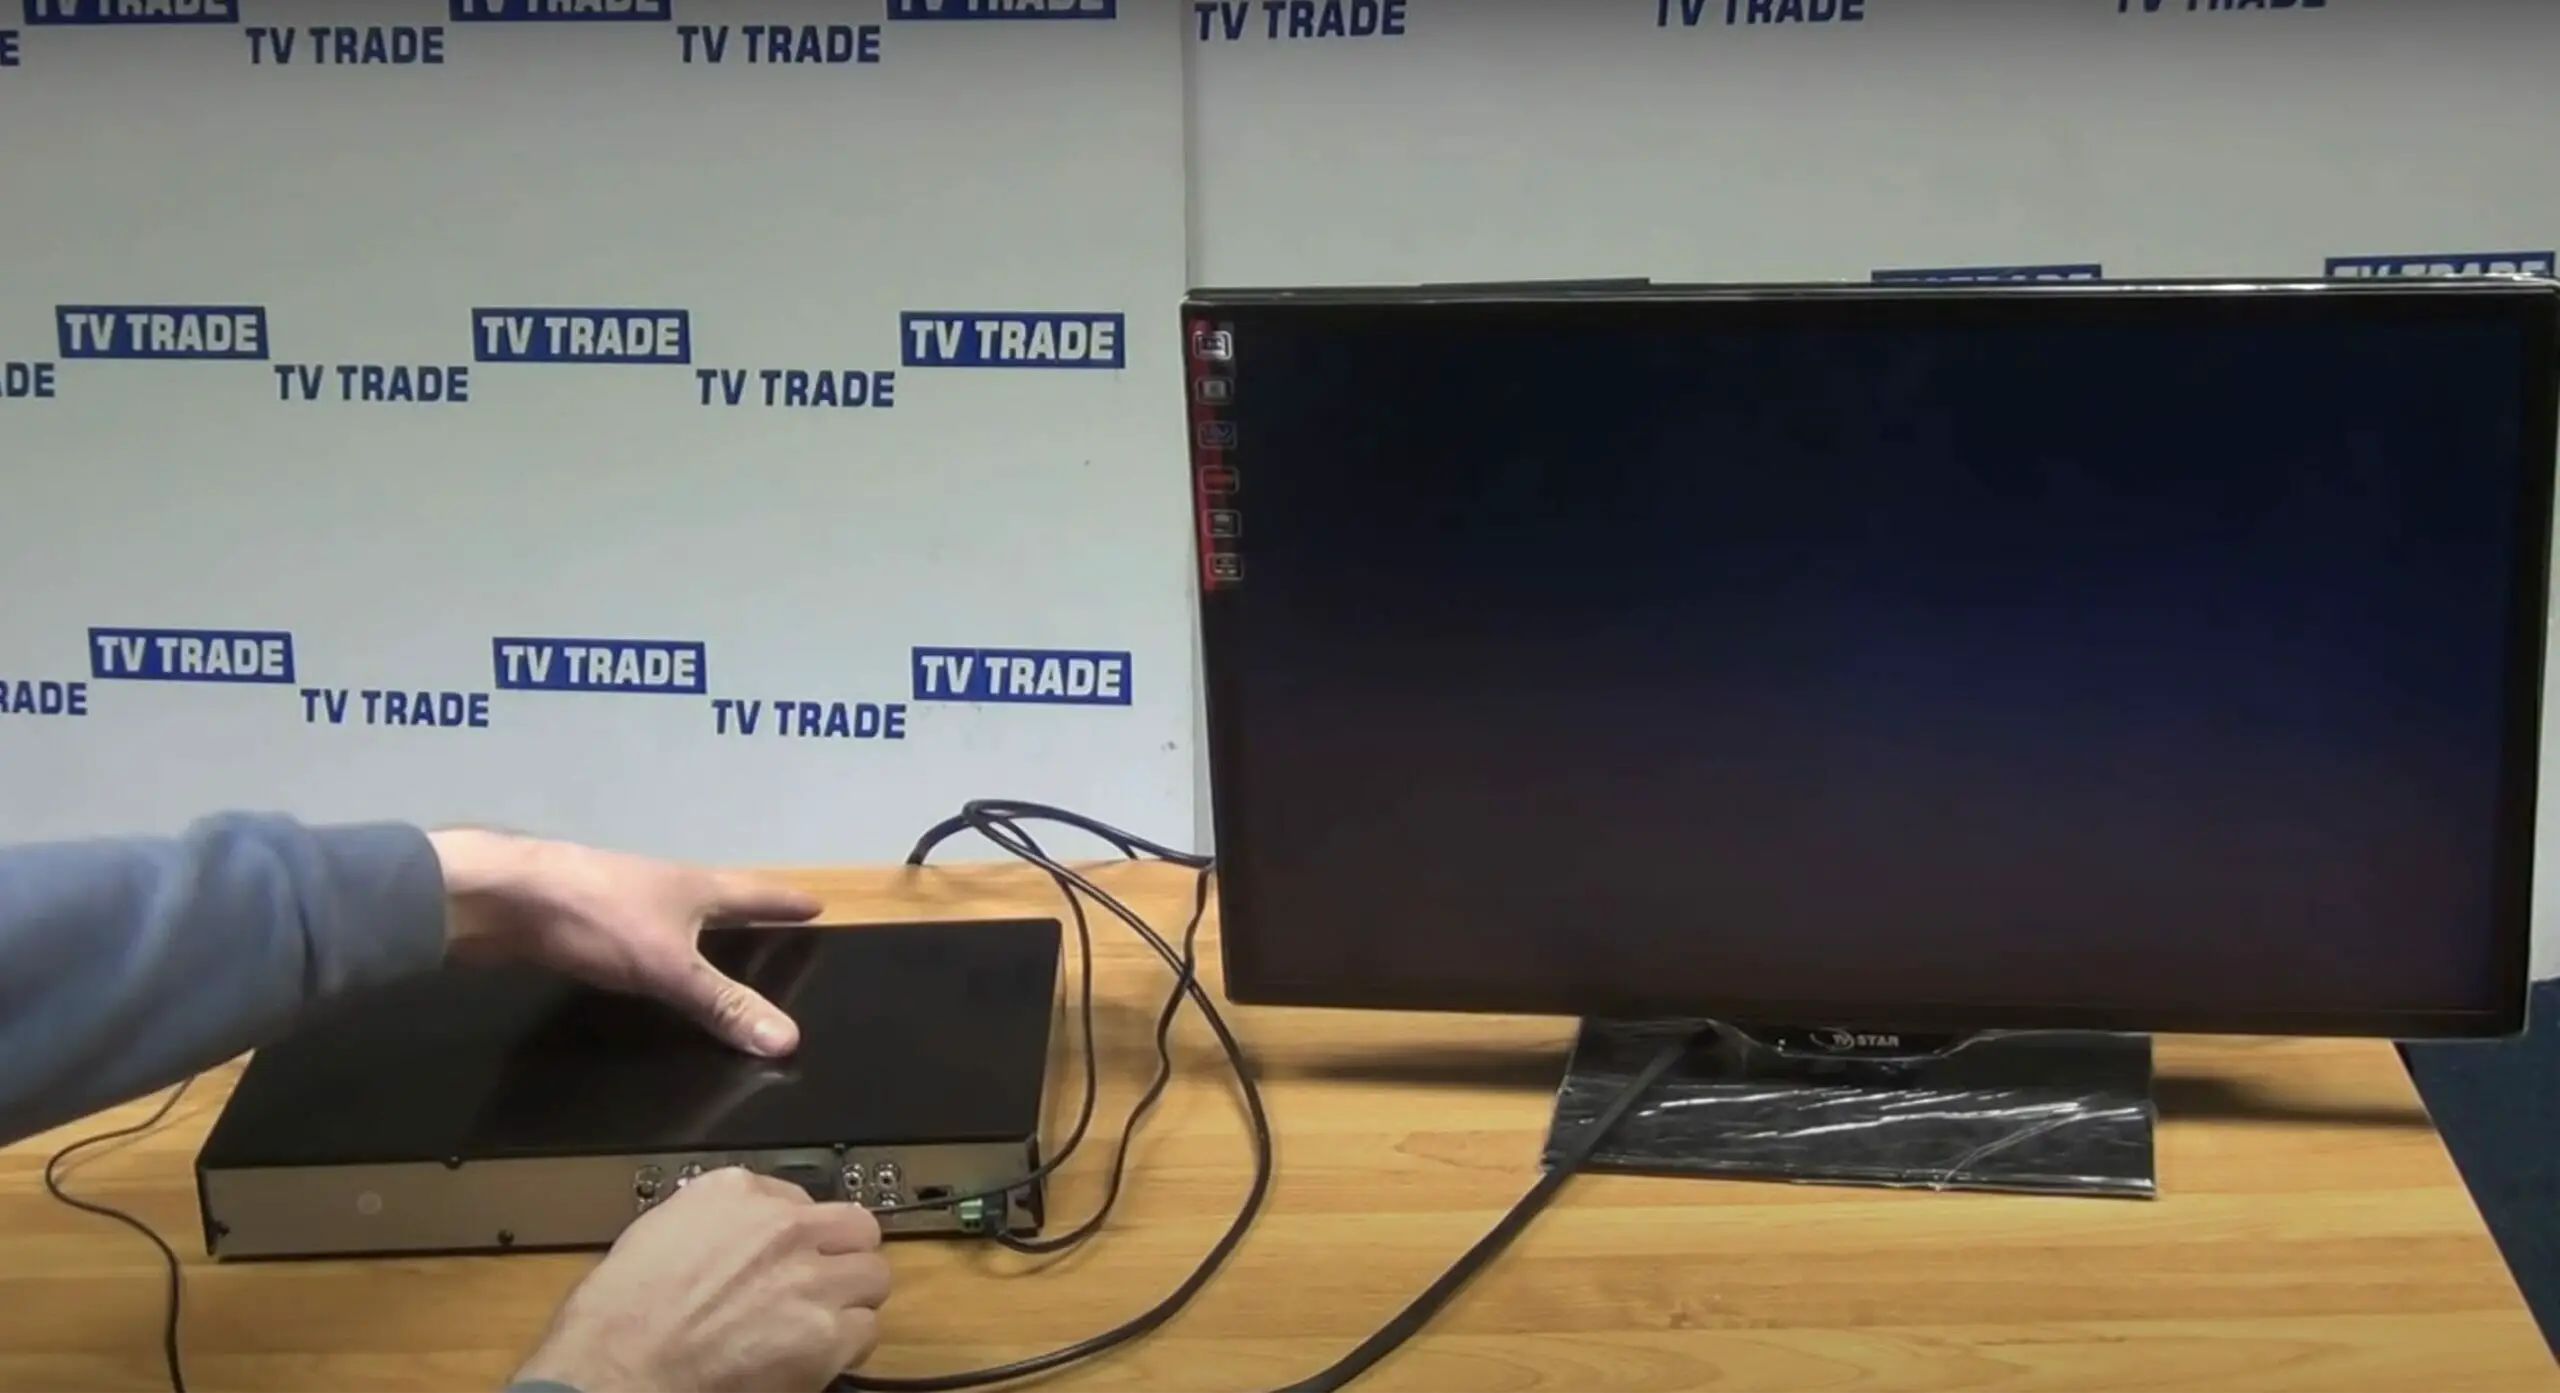 How To Hook Up Cable To Smart TV